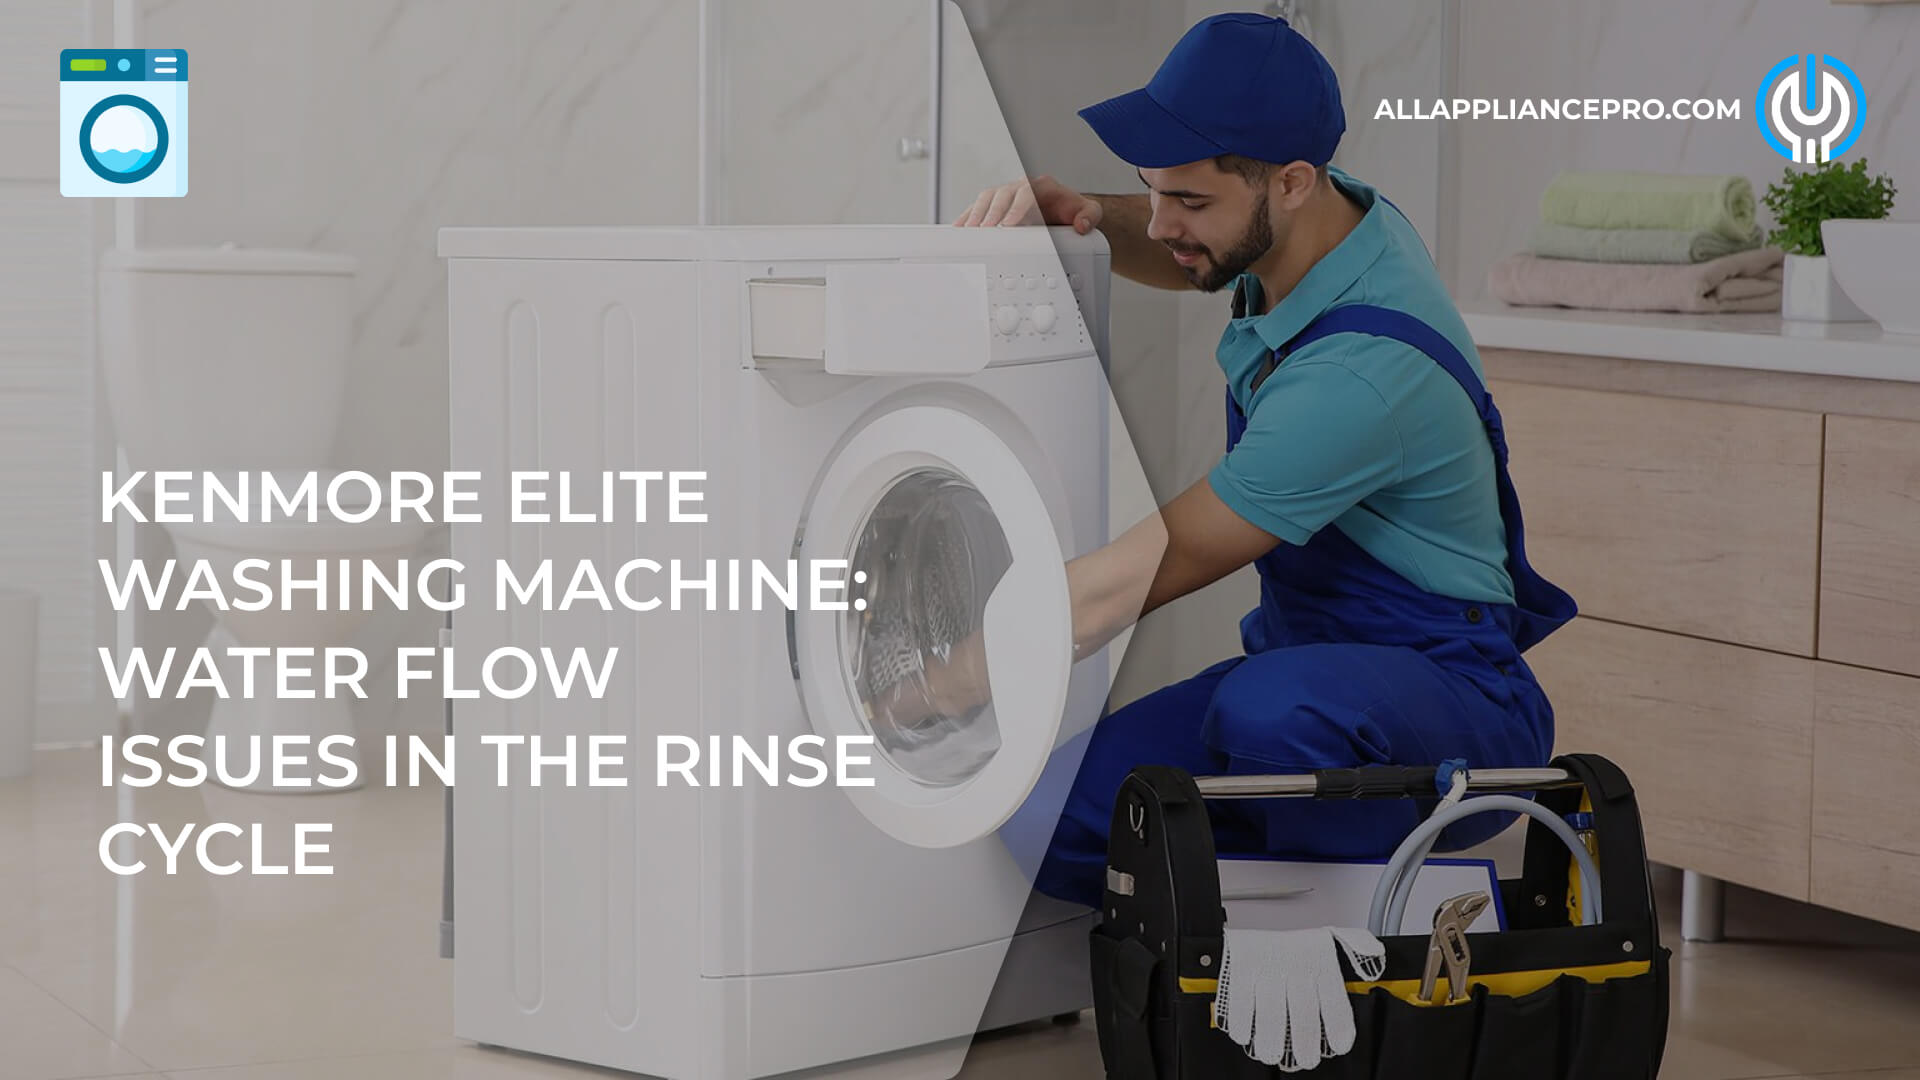 Kenmore Elite Washing Machine: Water Flow Issues in the Rinse Cycle